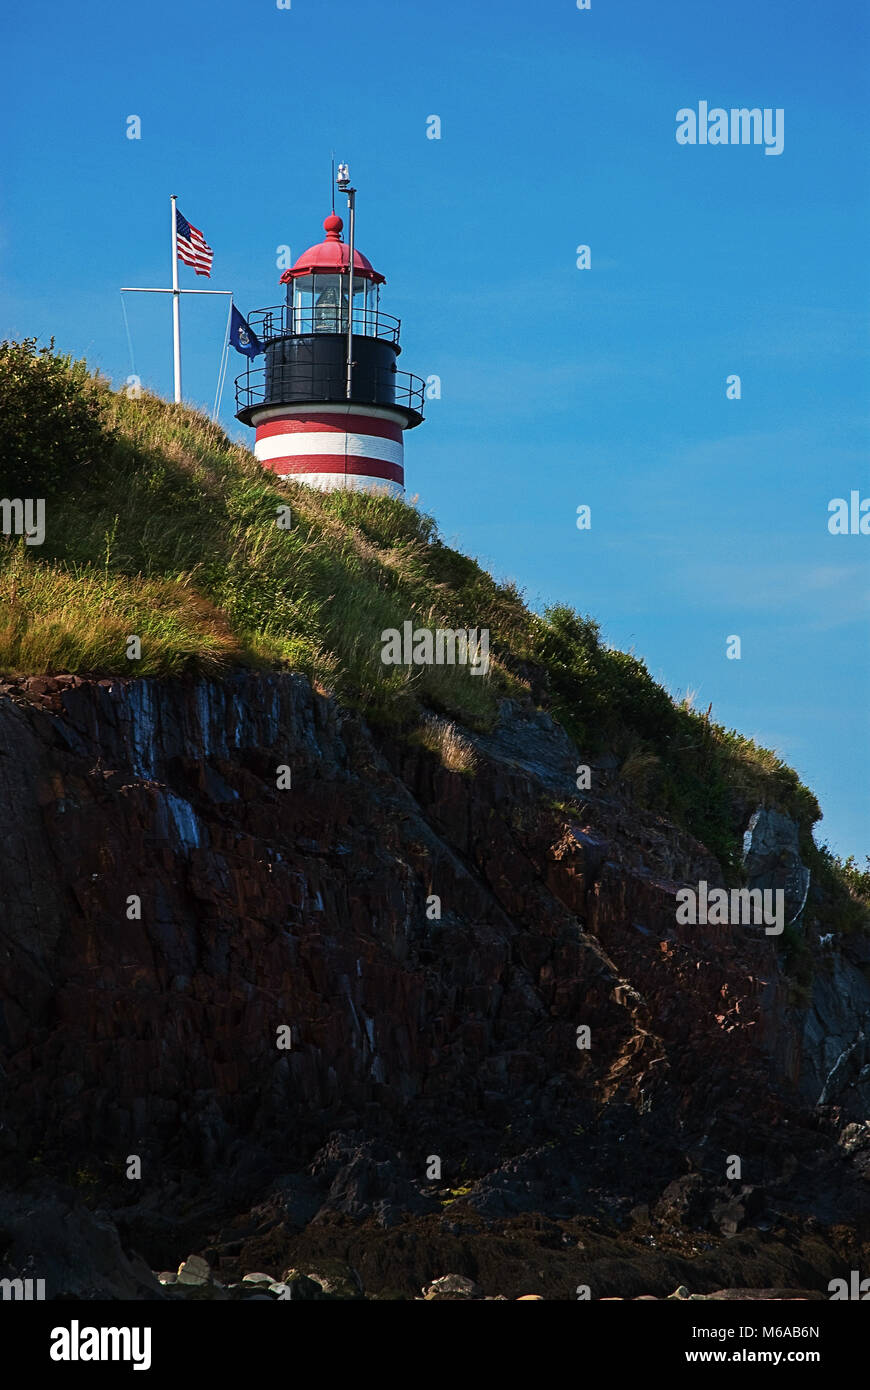 West Quoddy Head Lighthouse, painted in red and white stripes like a candy cane, overlooks a rocky cliff. The beacon resides in Lubec, Maine. Stock Photo